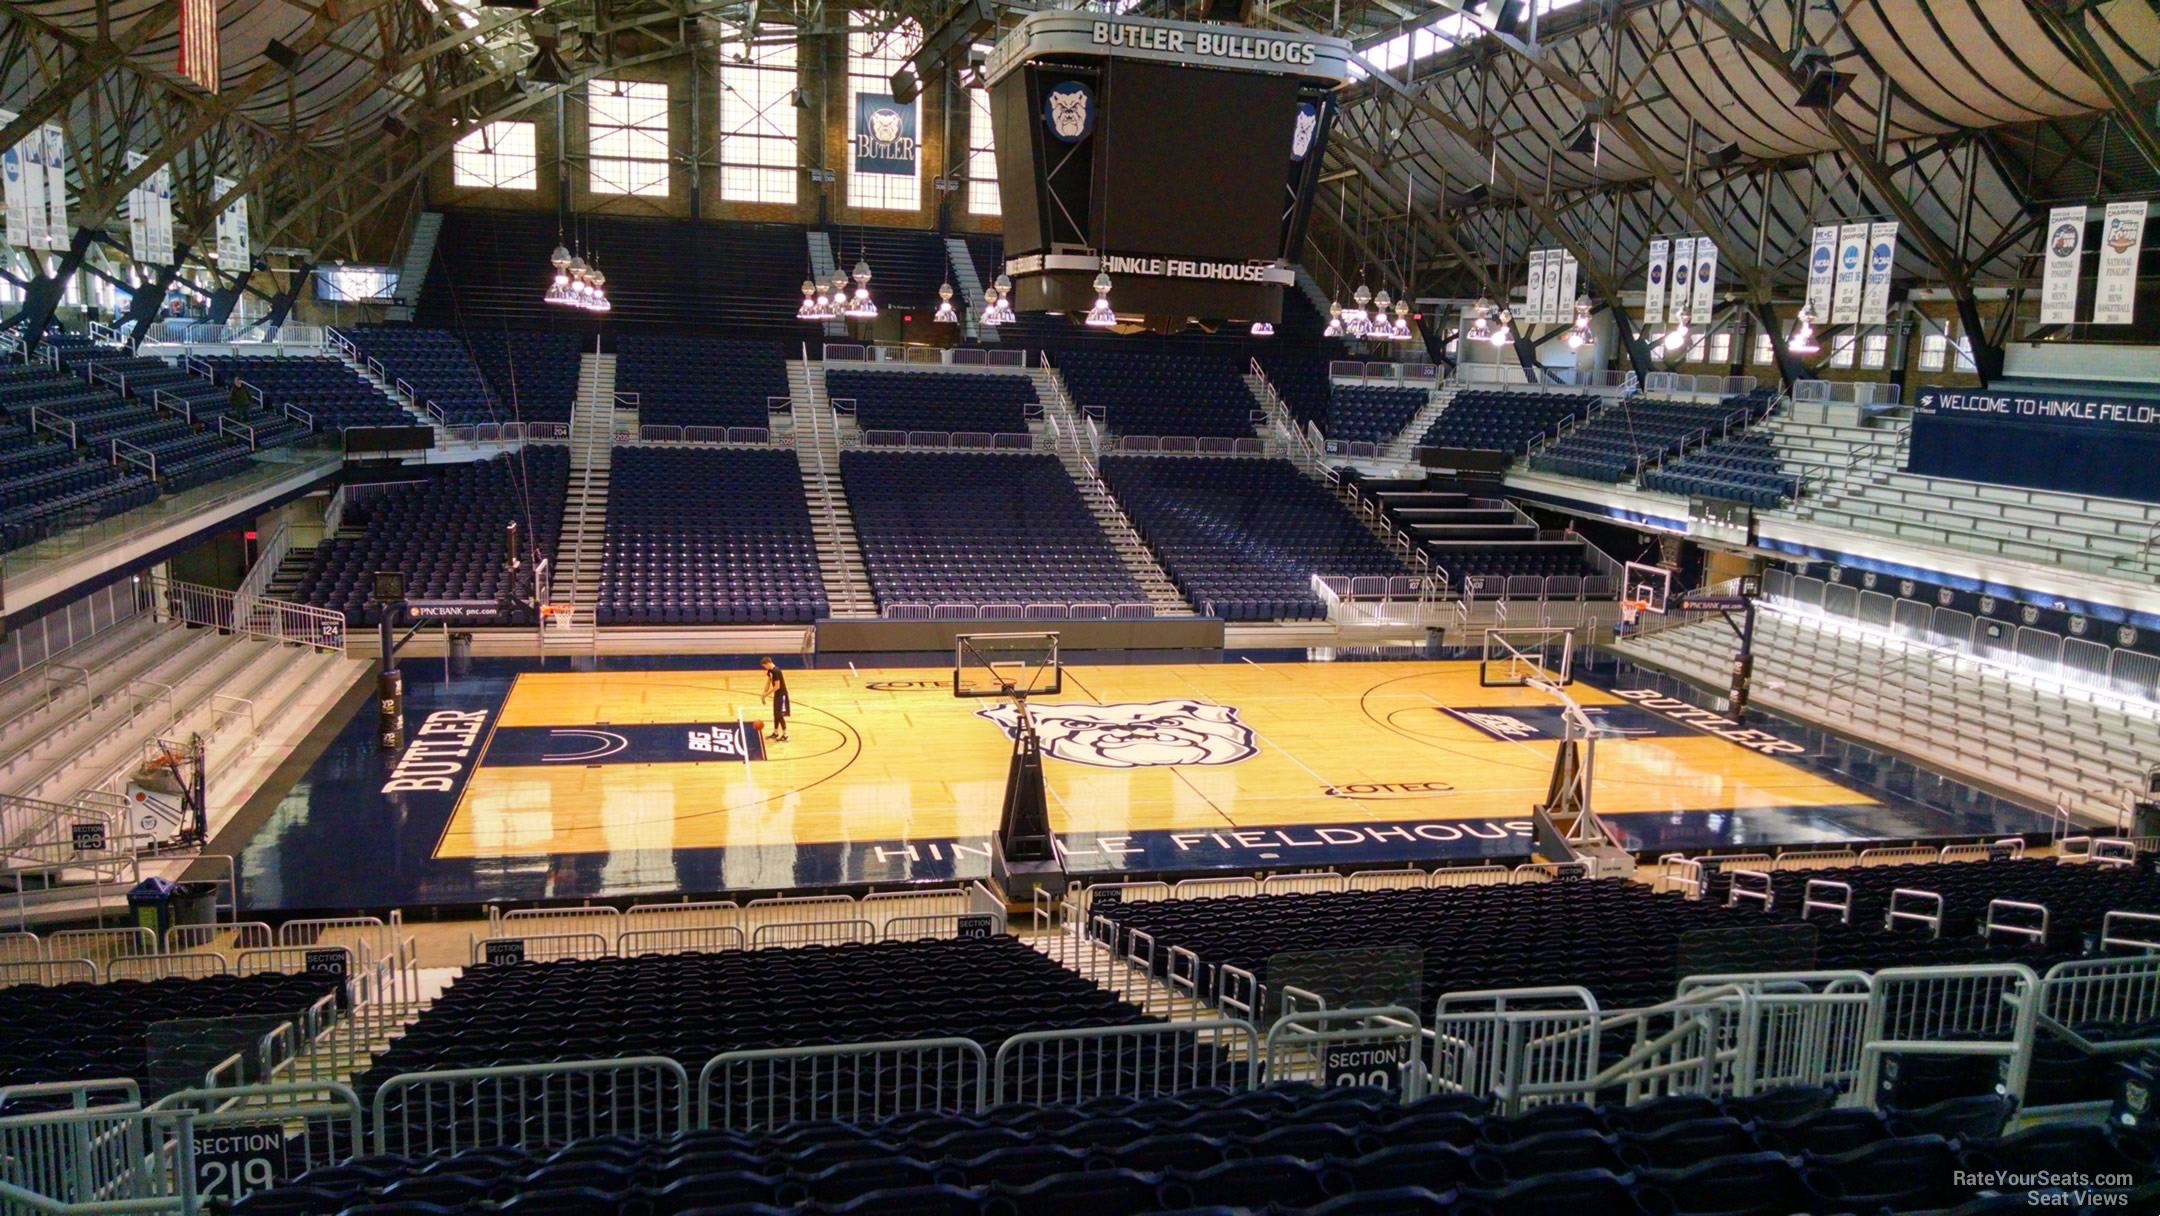 section 219, row 10 seat view  - hinkle fieldhouse